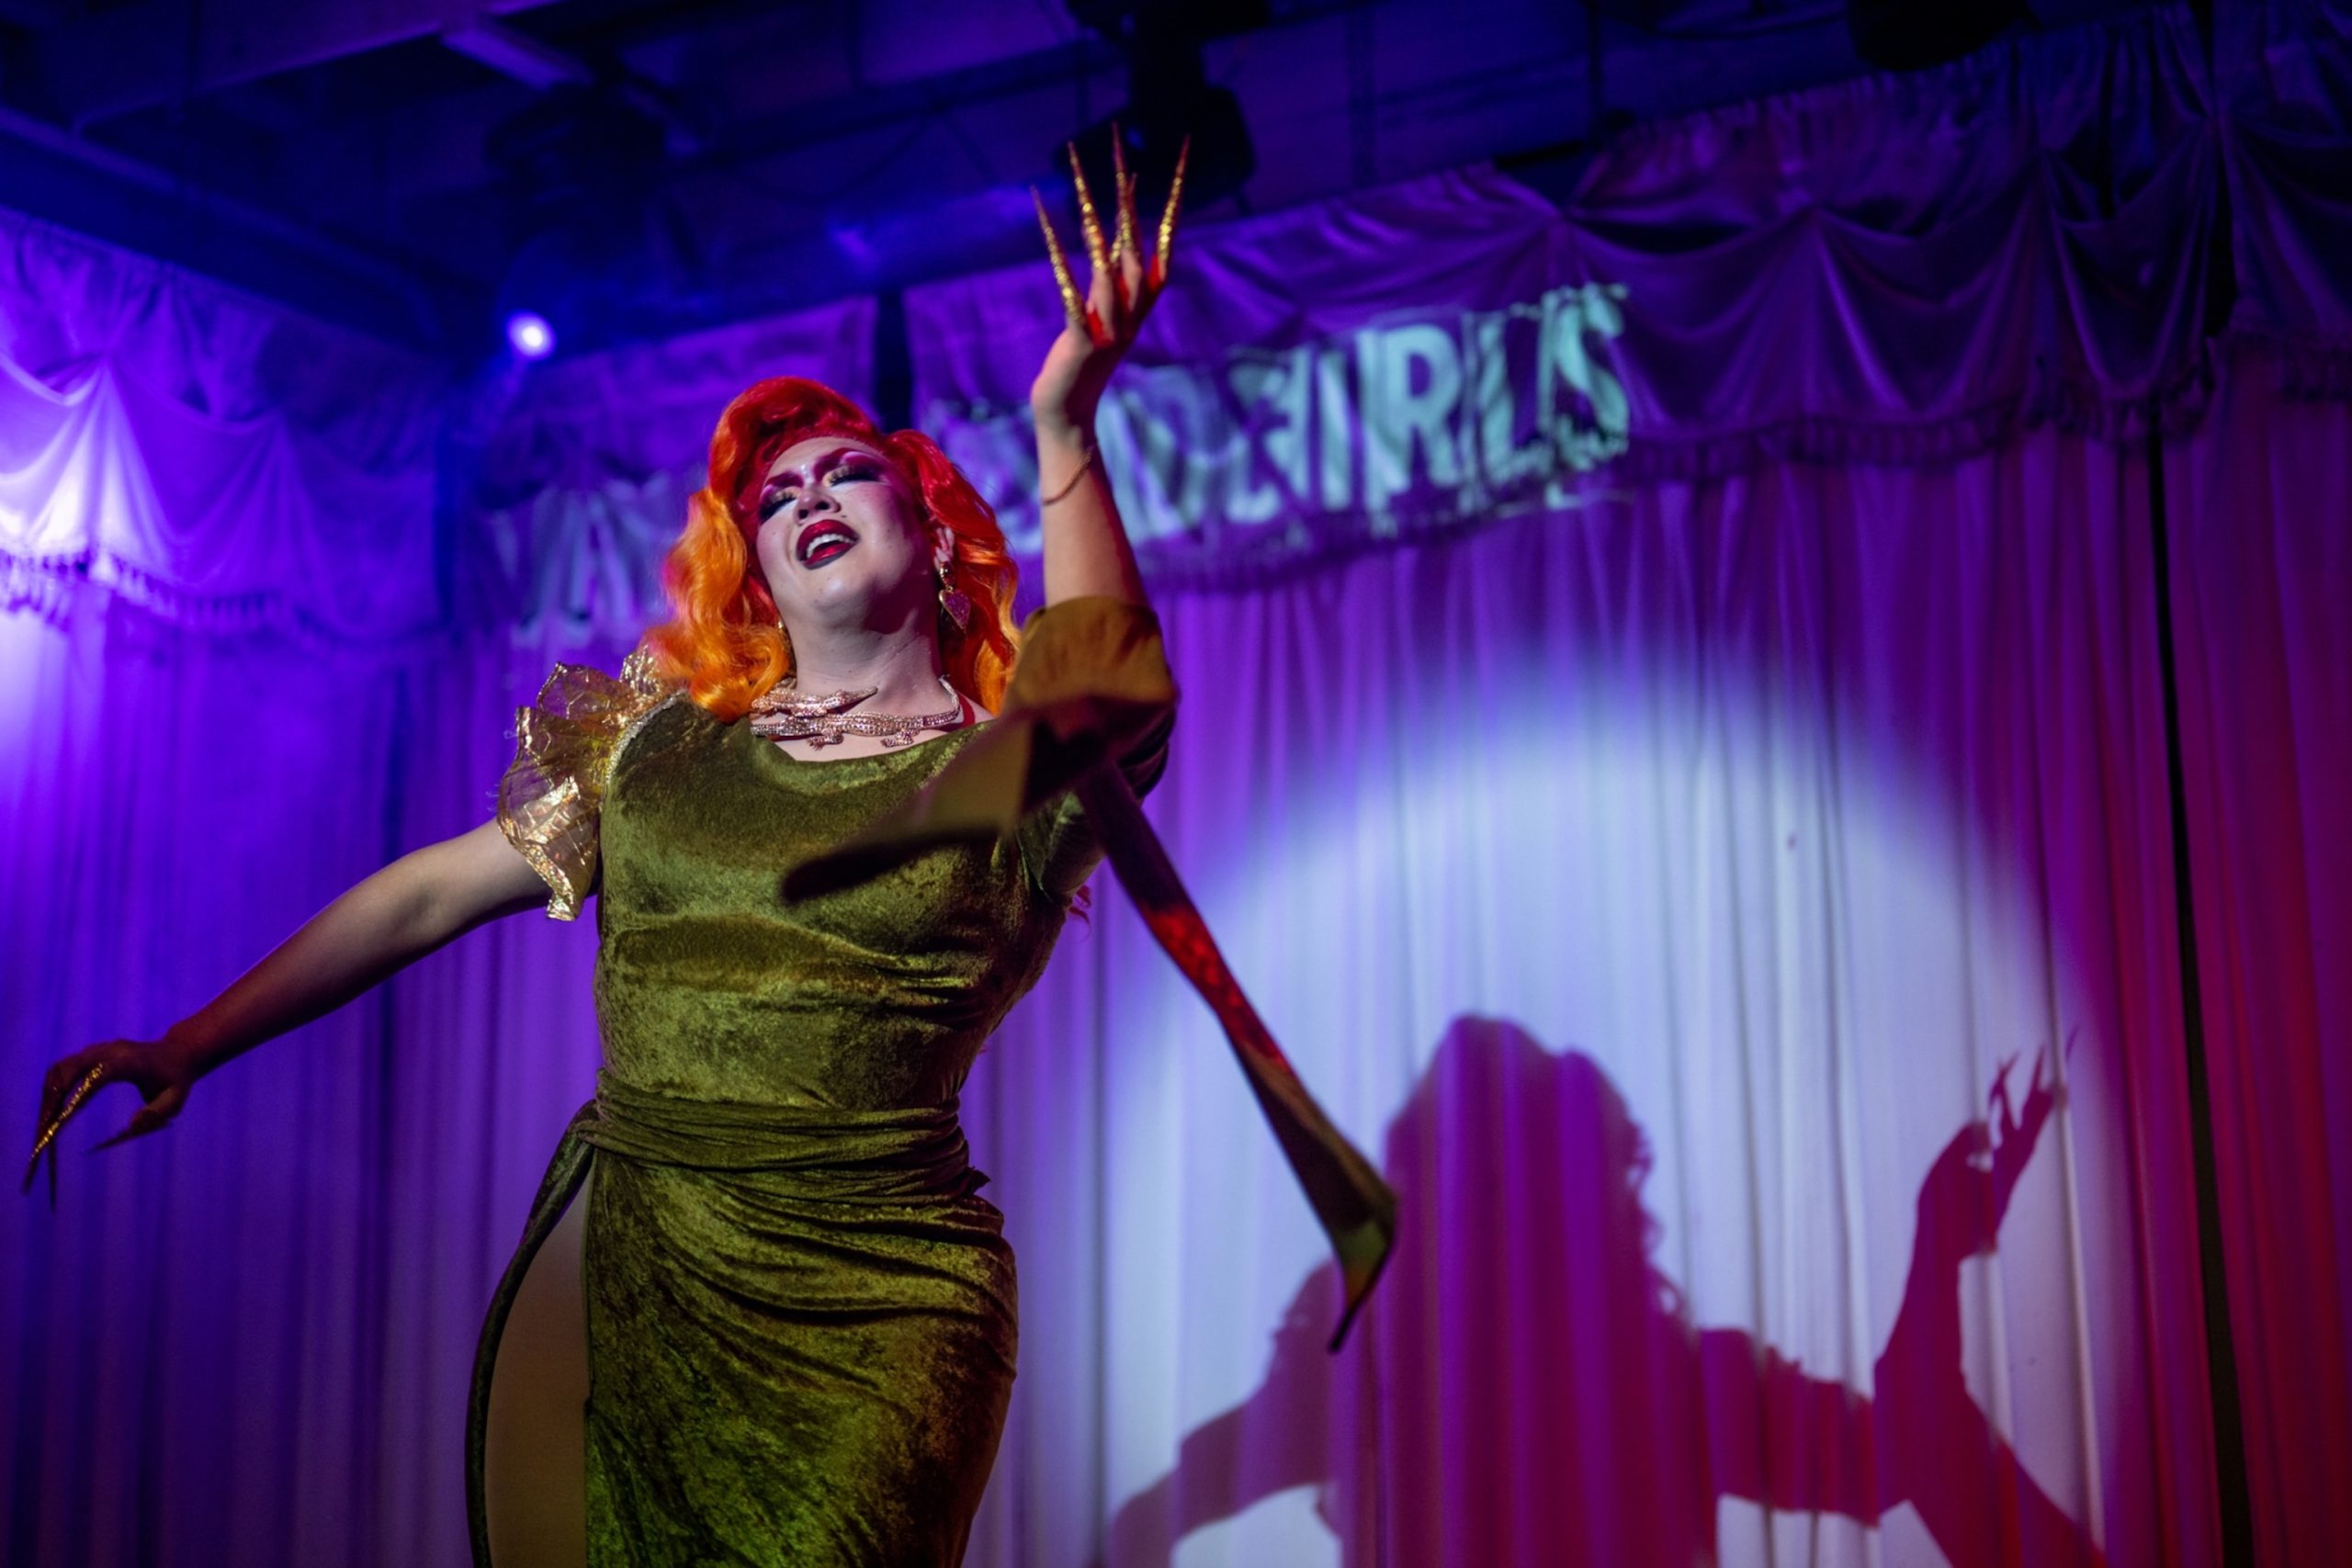 Texas law restricting drag shows ruled unconstitutional